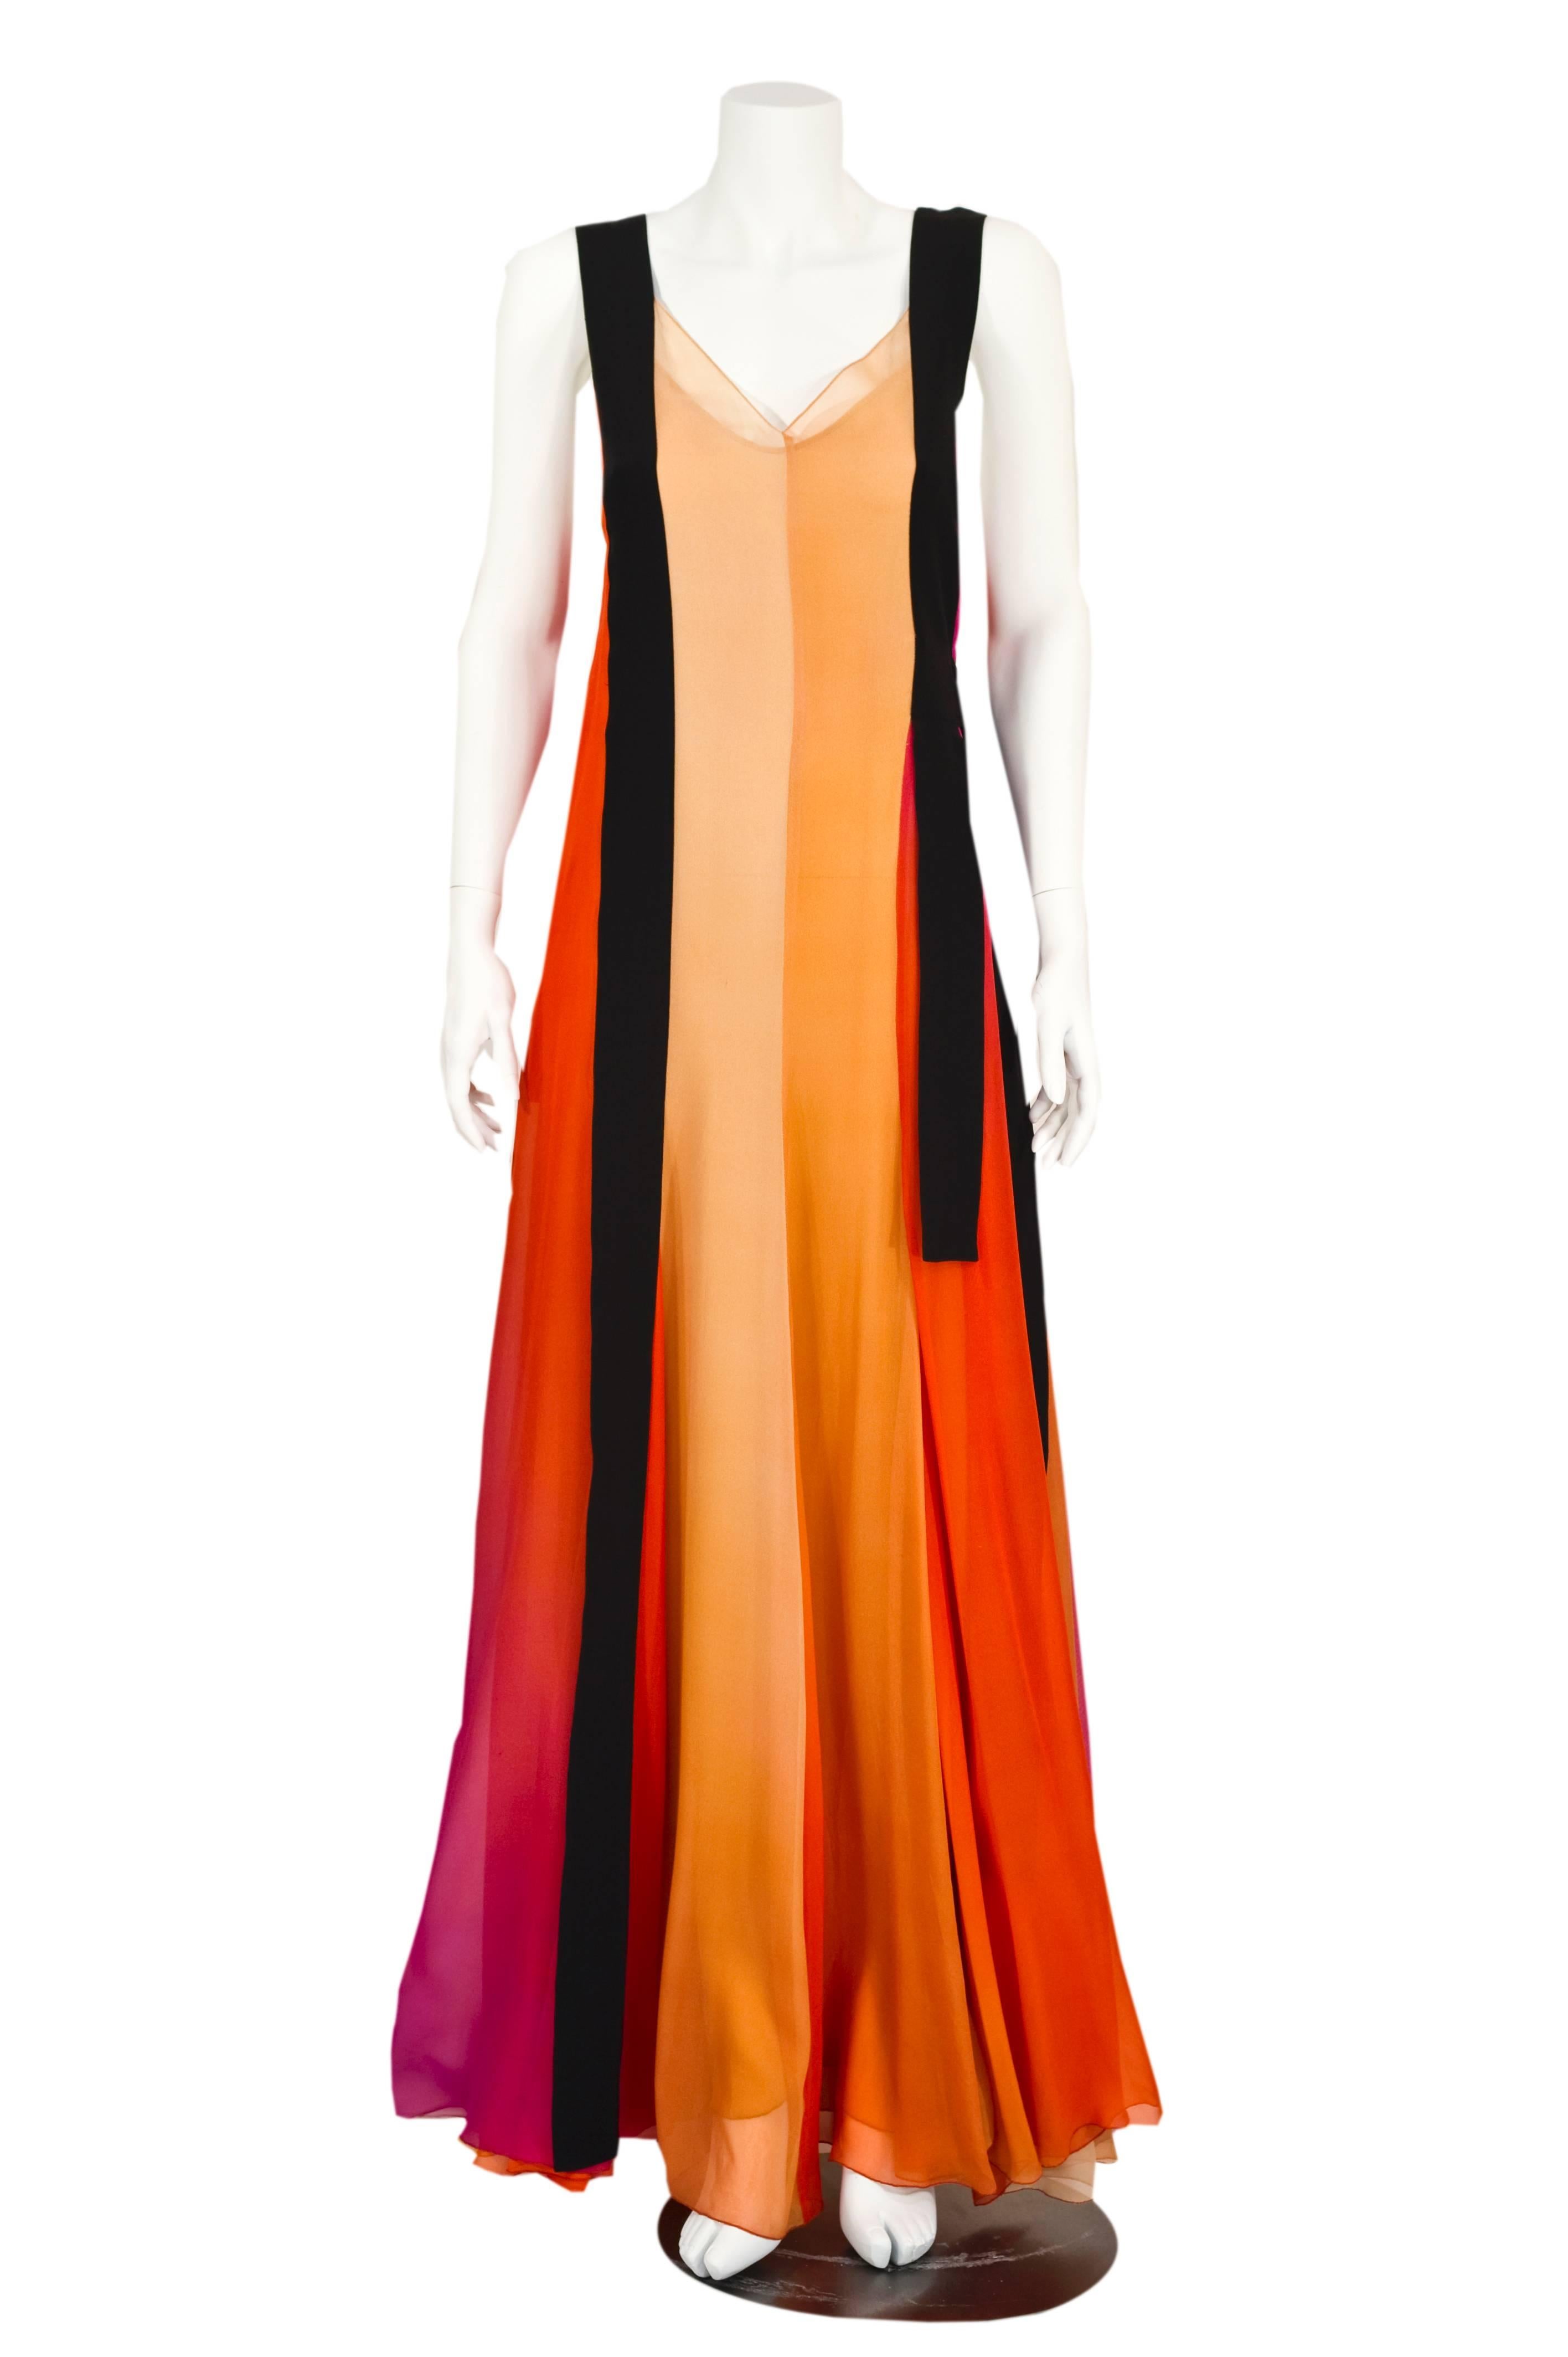 A stunning Sonia Rykiel  gown from spring 2012. Long flowing  color block ombre panels of  fine  silk chiffon in nudes, apricot, vibrant orange and magenta.   Black silk streamer shoulder straps float over the gown and off to the side. This